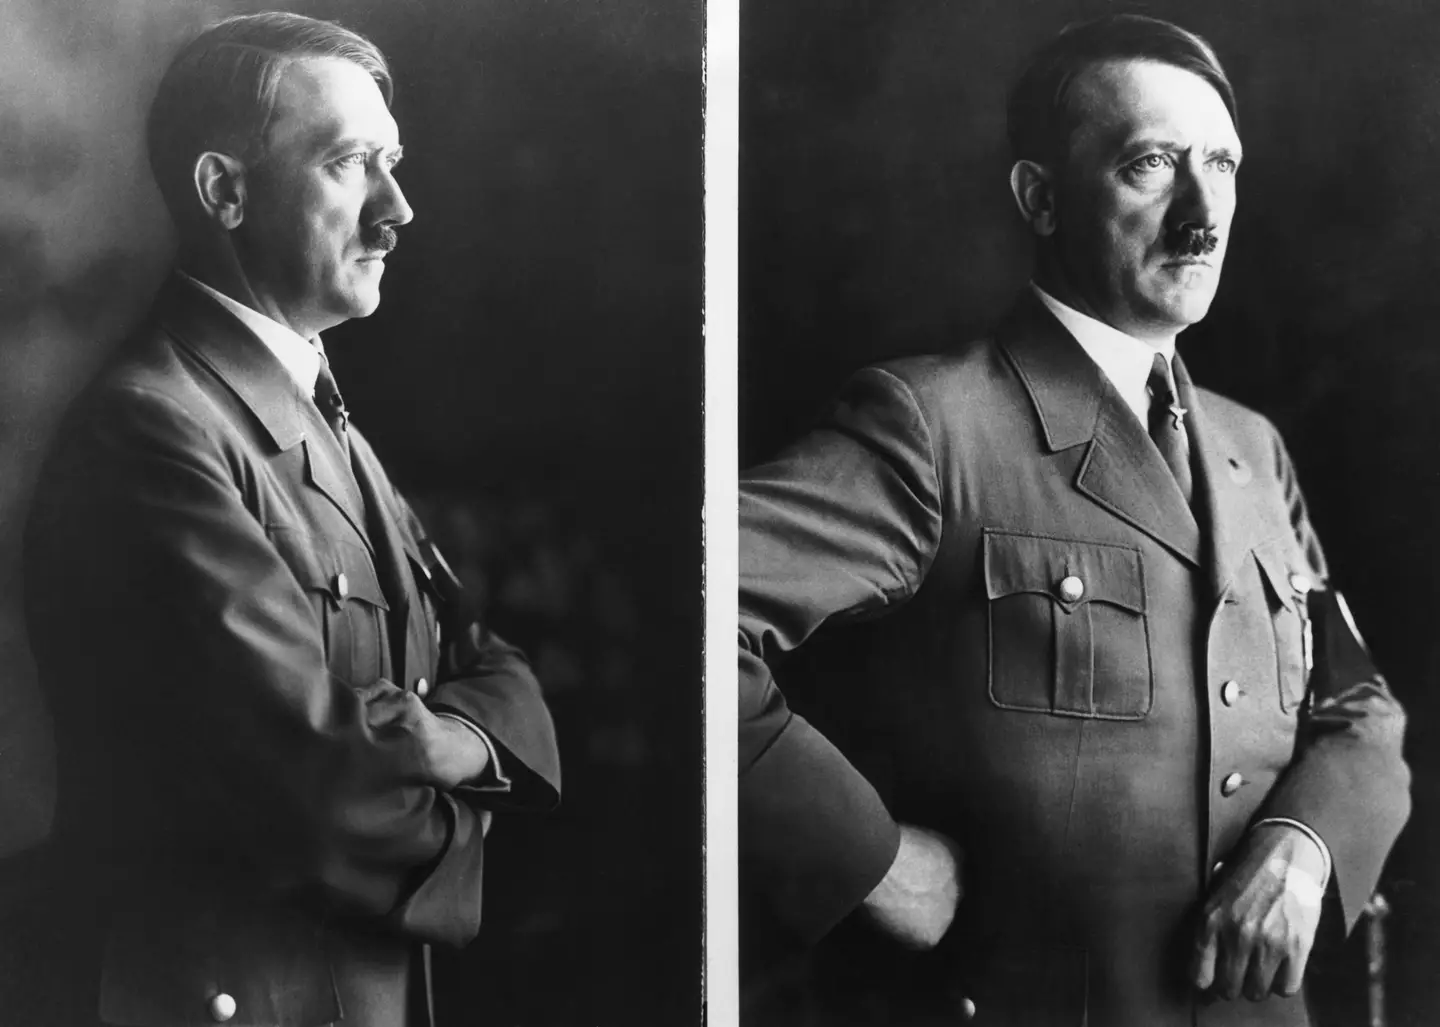 An image of Hitler was shown to game-goers.